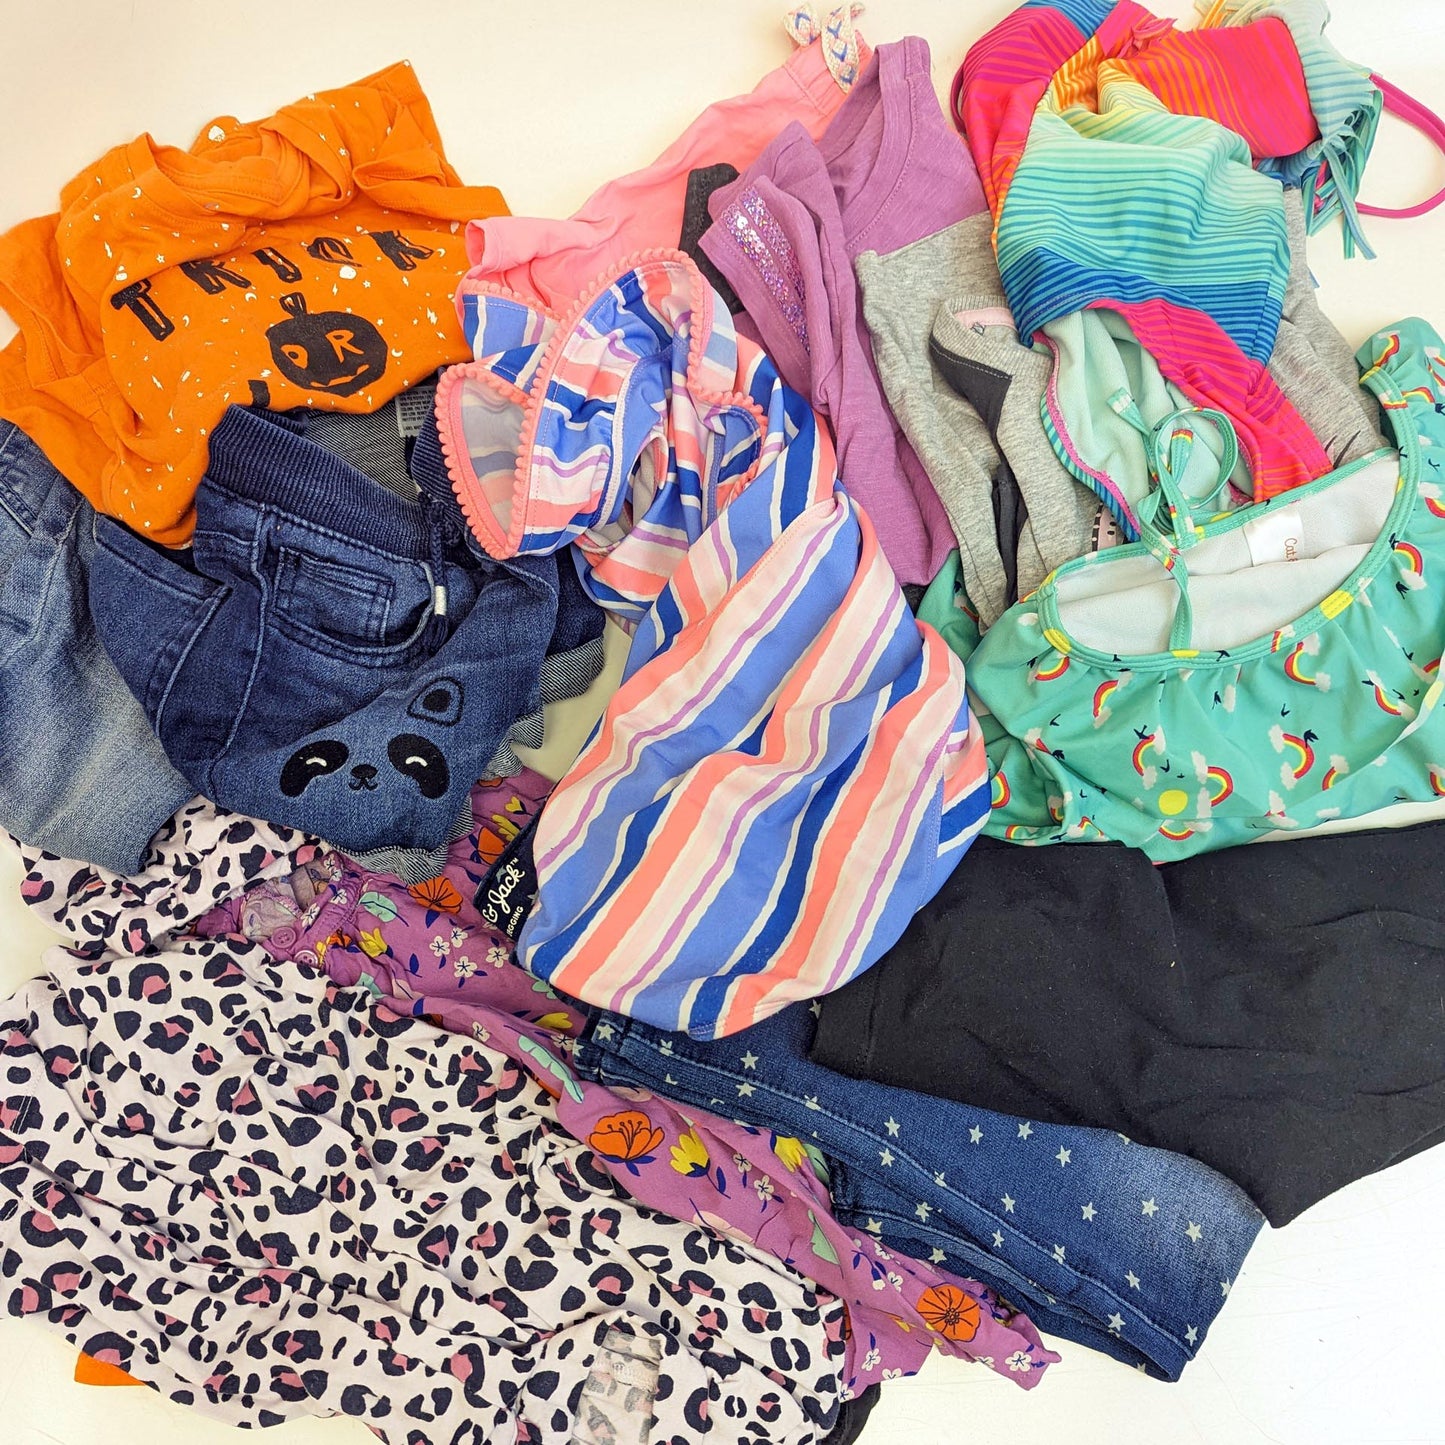 100+ Pieces Girls Clothes Resellers Lot Stella, Juicy, Nautica and More